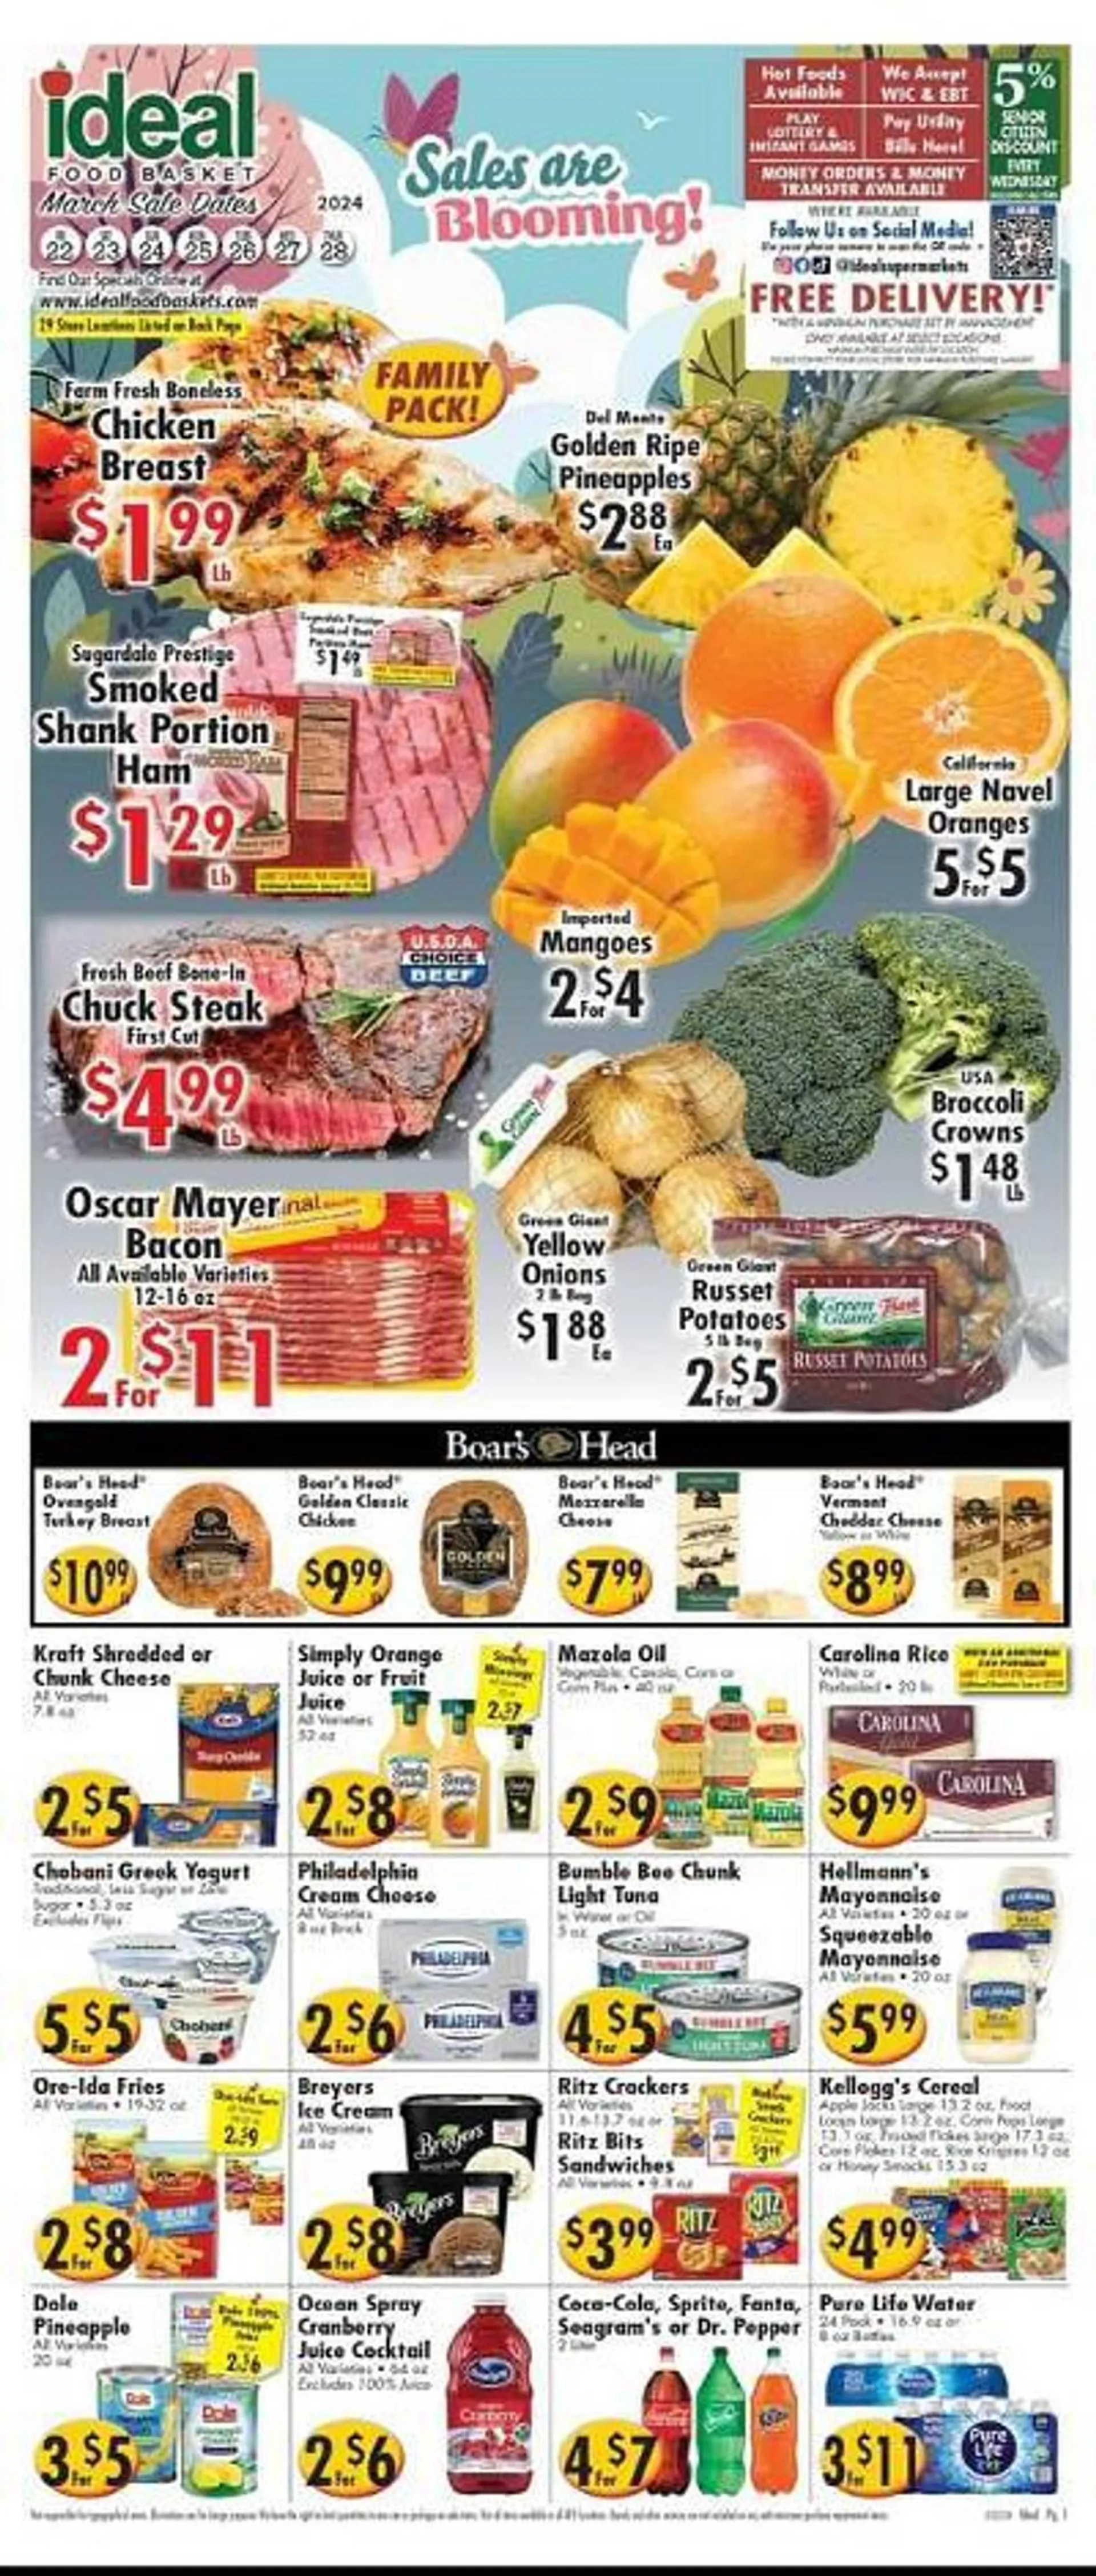 Weekly ad Ideal Food Basket Weekly Ad from March 22 to March 28 2024 - Page 1